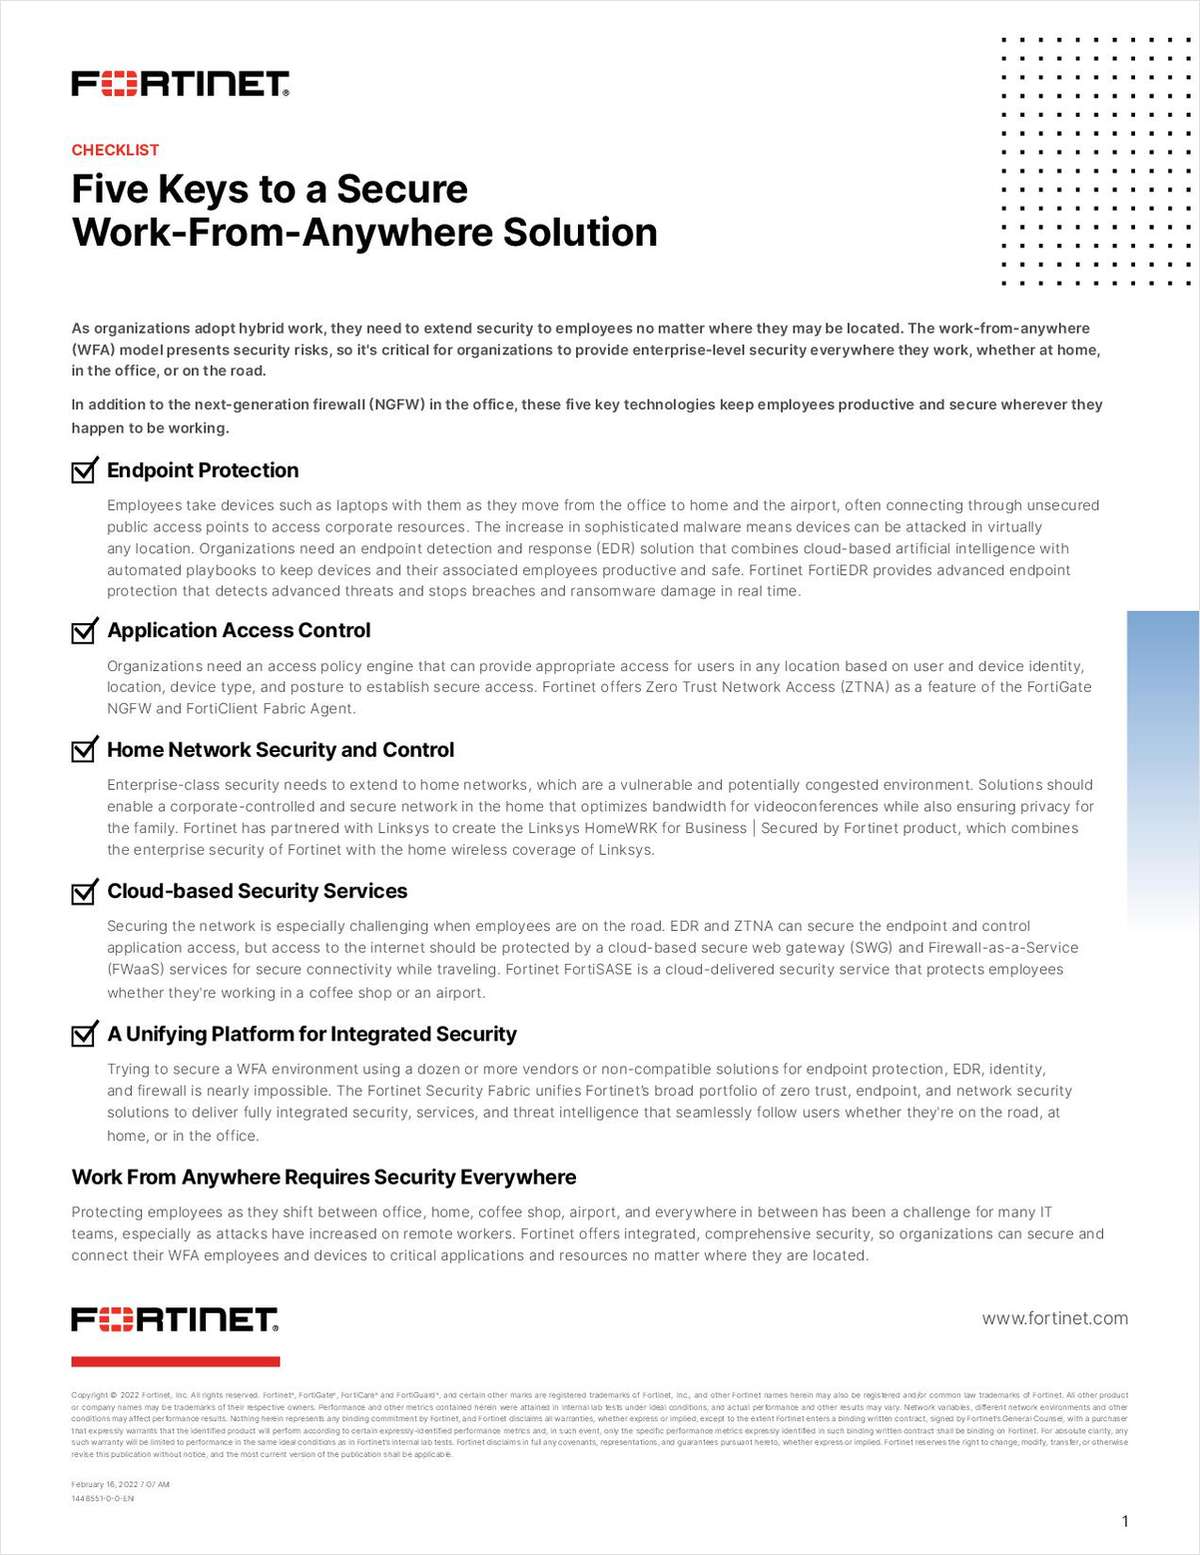 Five Keys to a Secure Work-From-Anywhere Solution